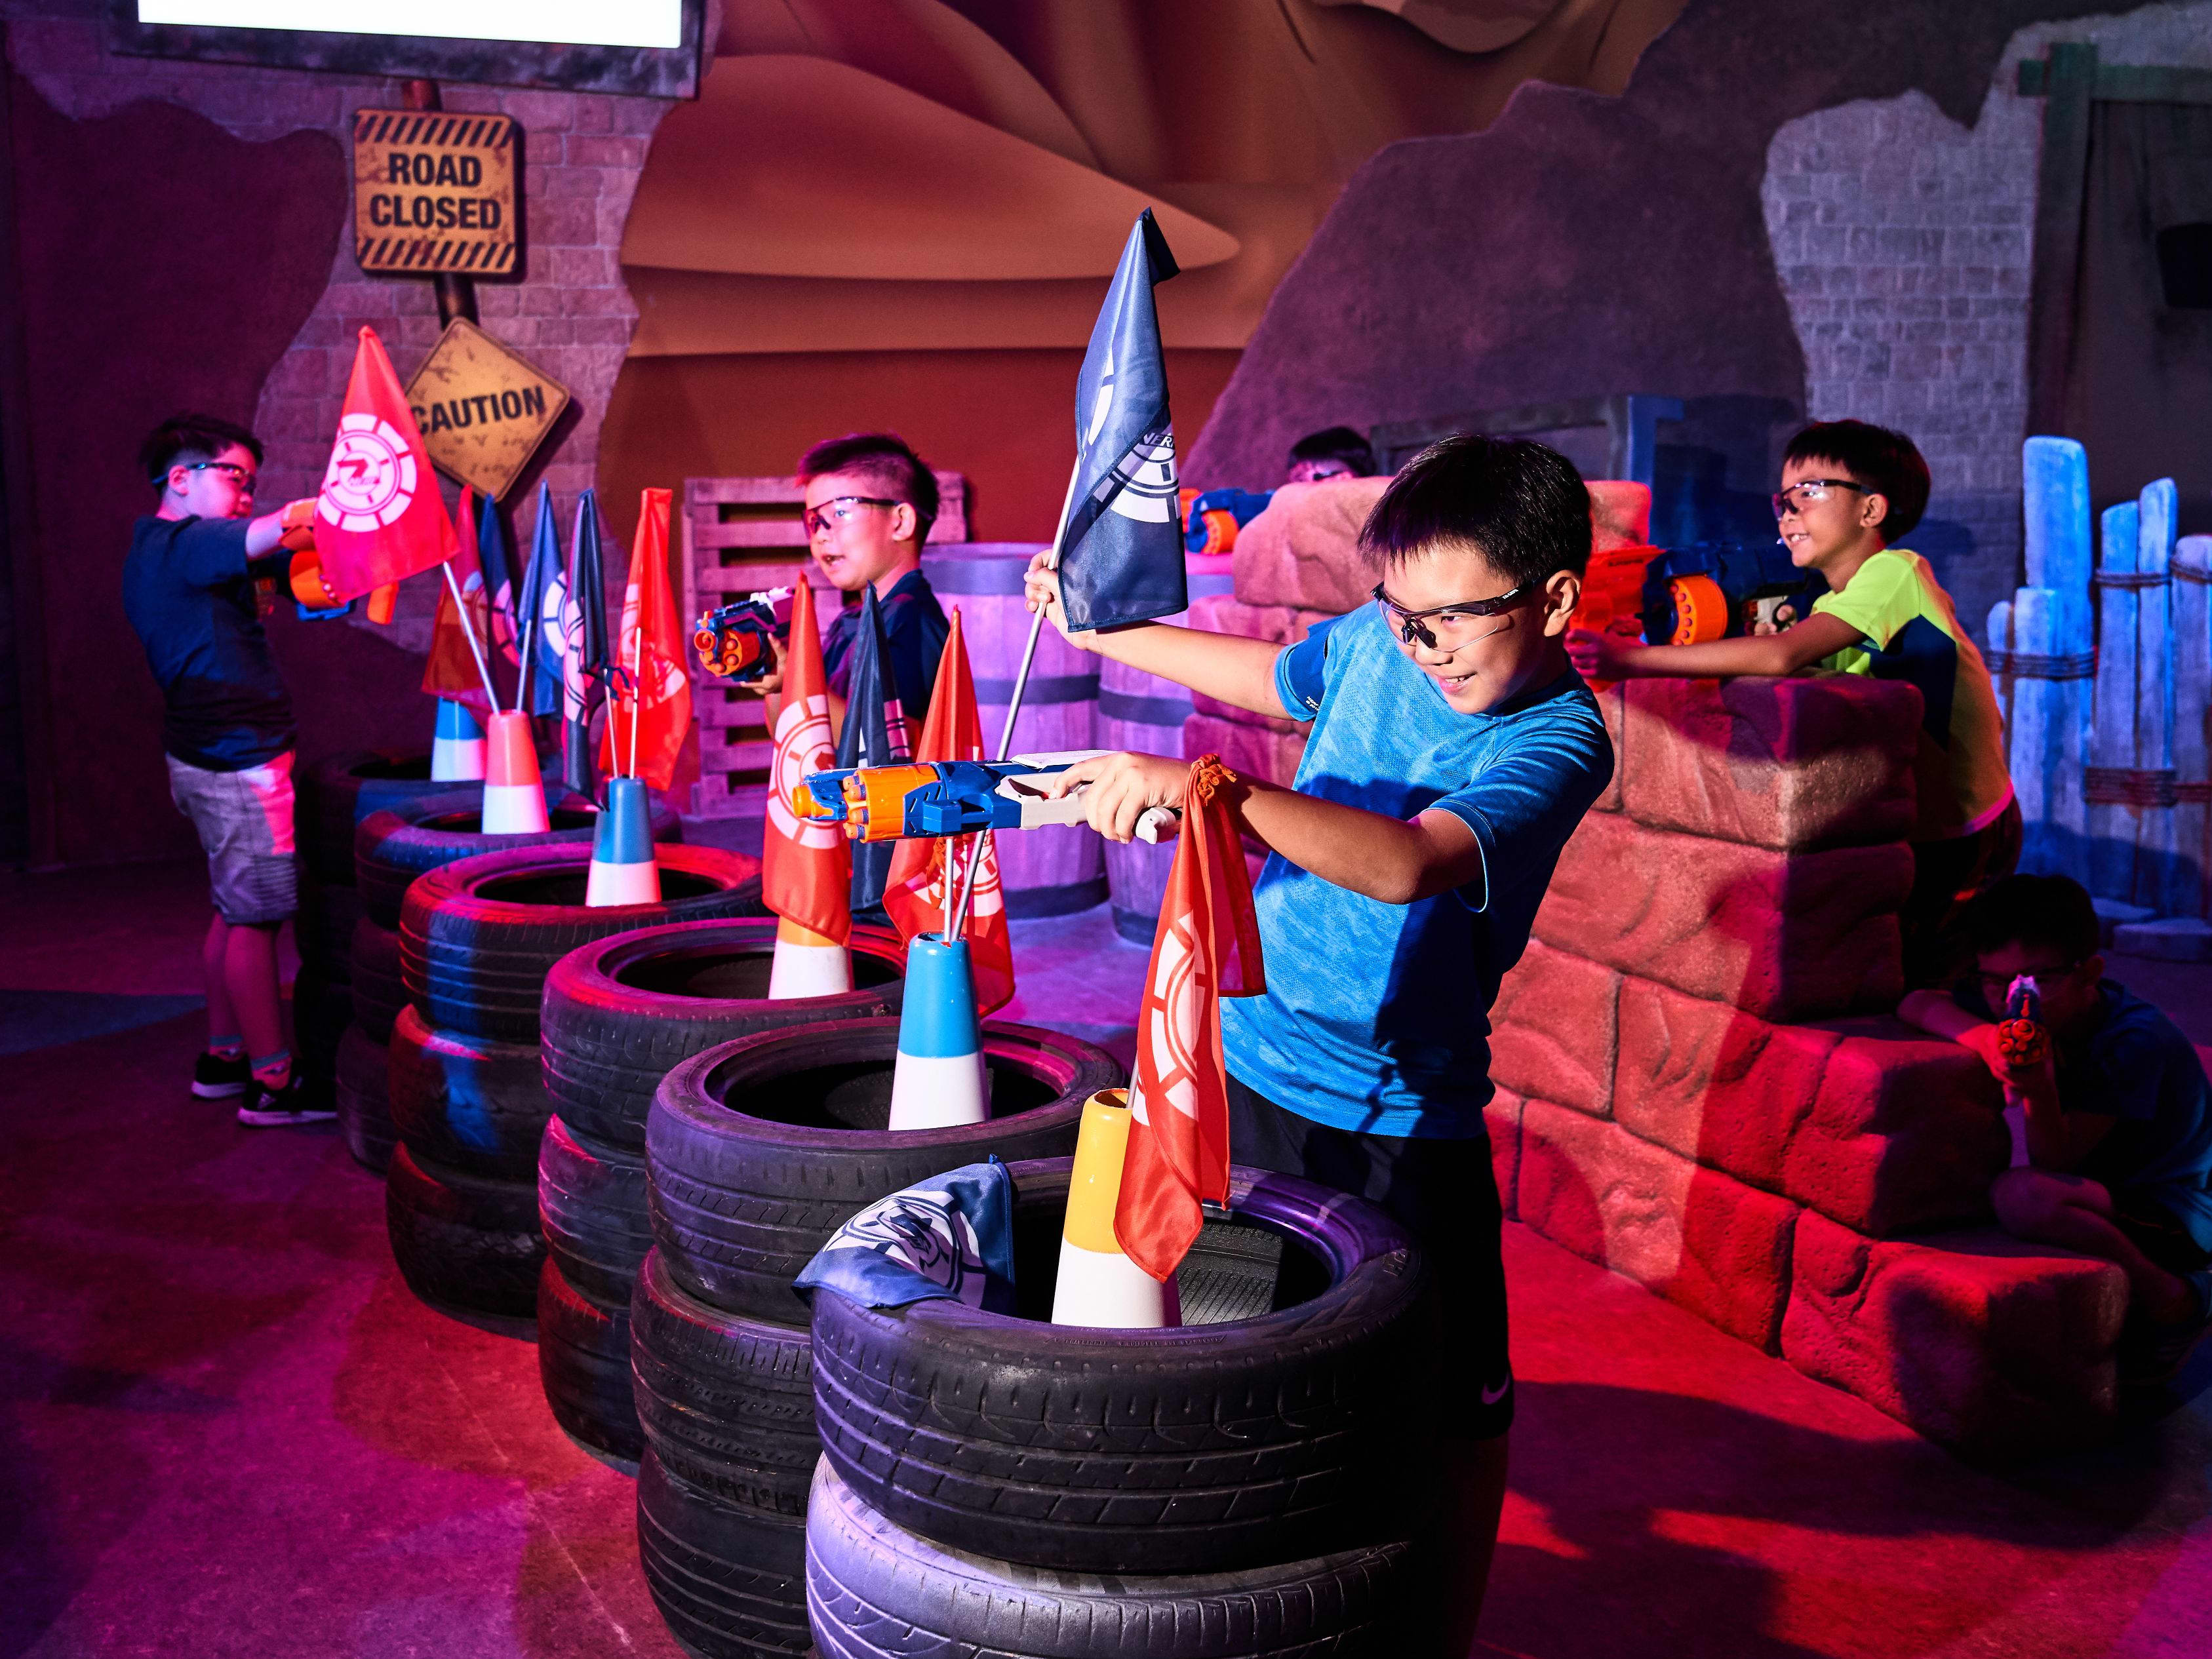 All In at Nerf Action Experience - Get Deals, Cashback and Rewards with ShopBack GO